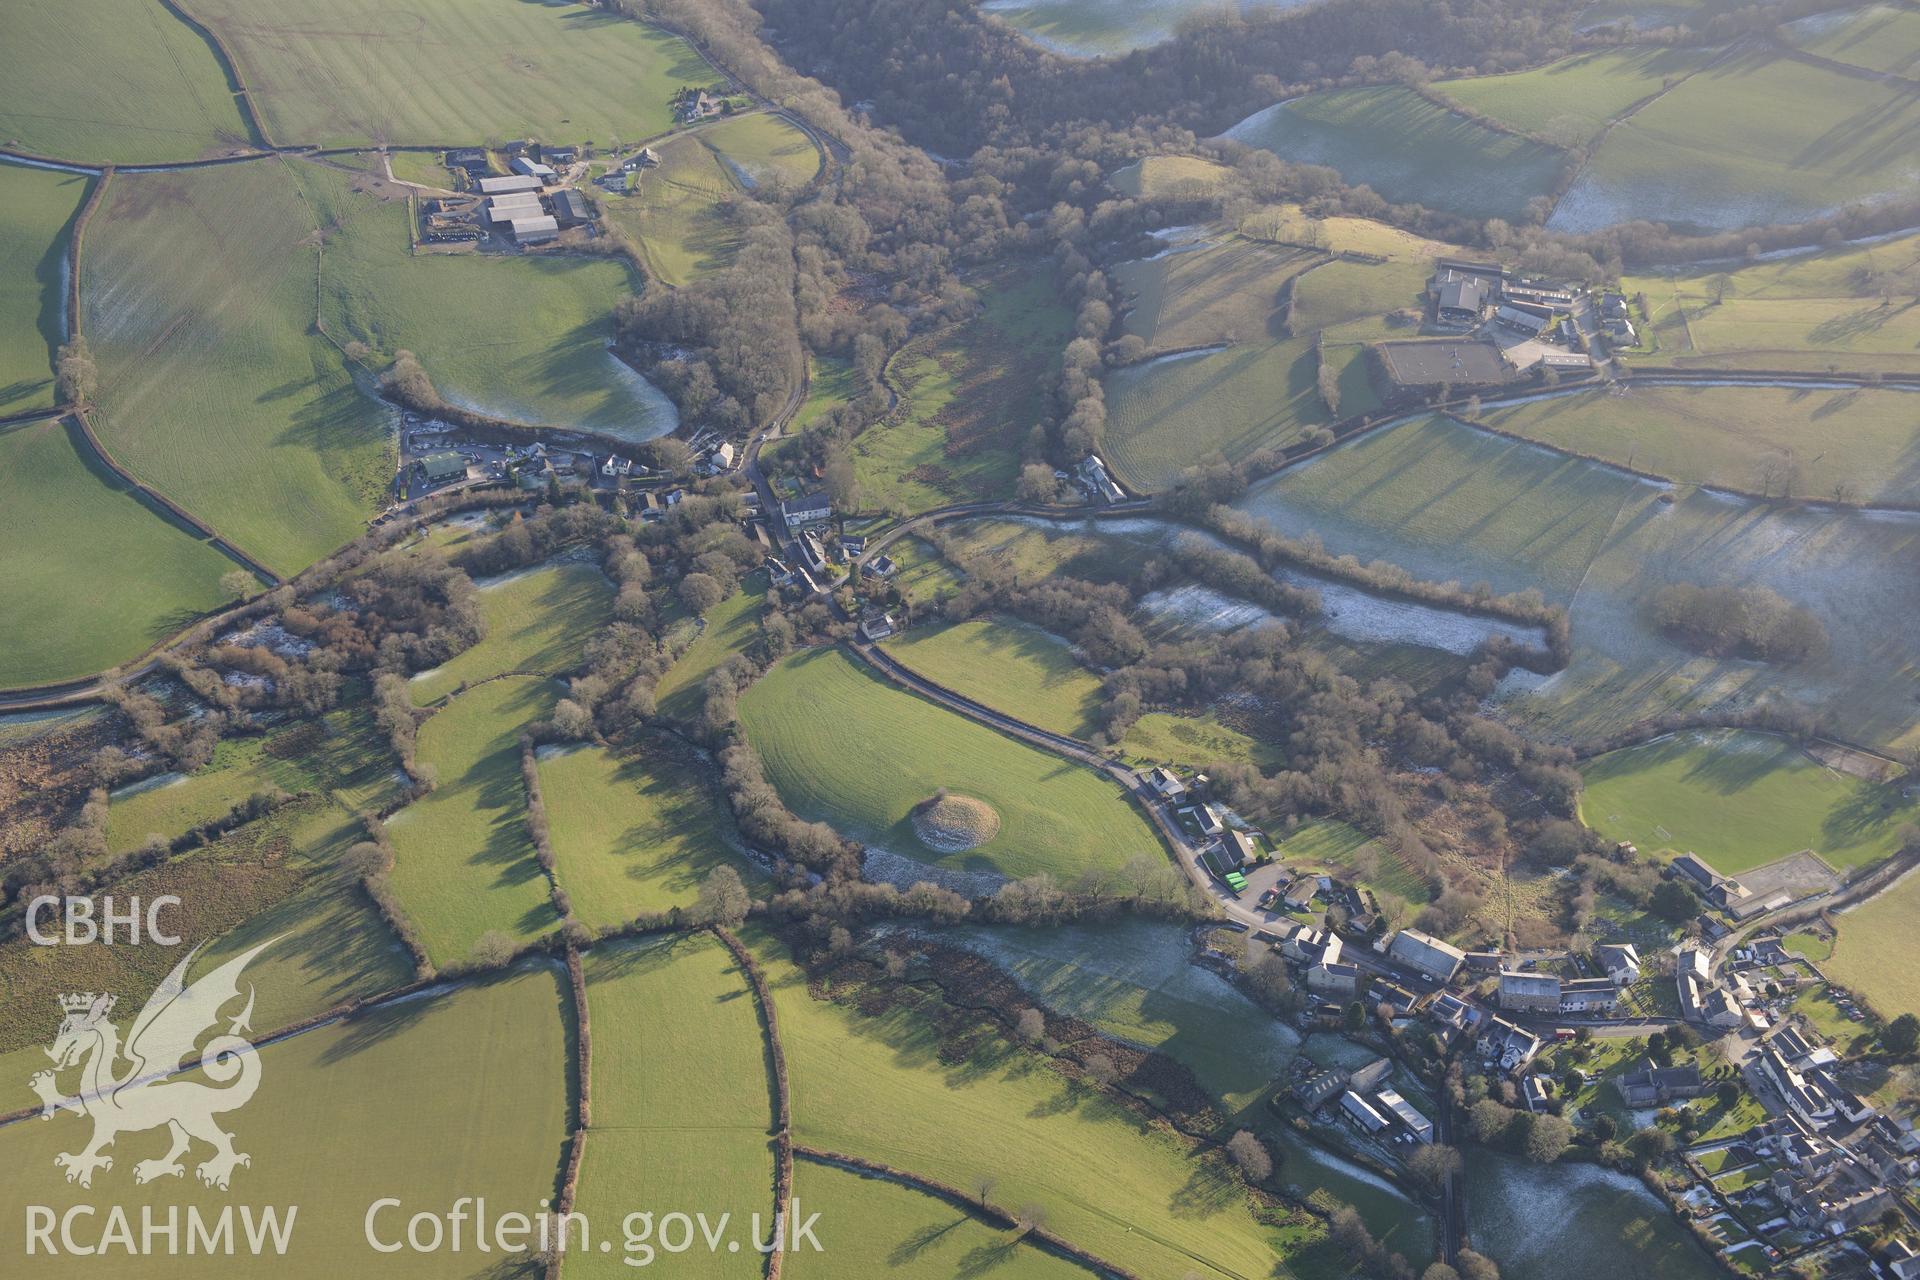 Castell Mawr motte and bailey and the village of Llanboidy, north west of Carmarthen. Oblique aerial photograph taken during the Royal Commission's programme of archaeological aerial reconnaissance by Toby Driver on 4th February 2015.